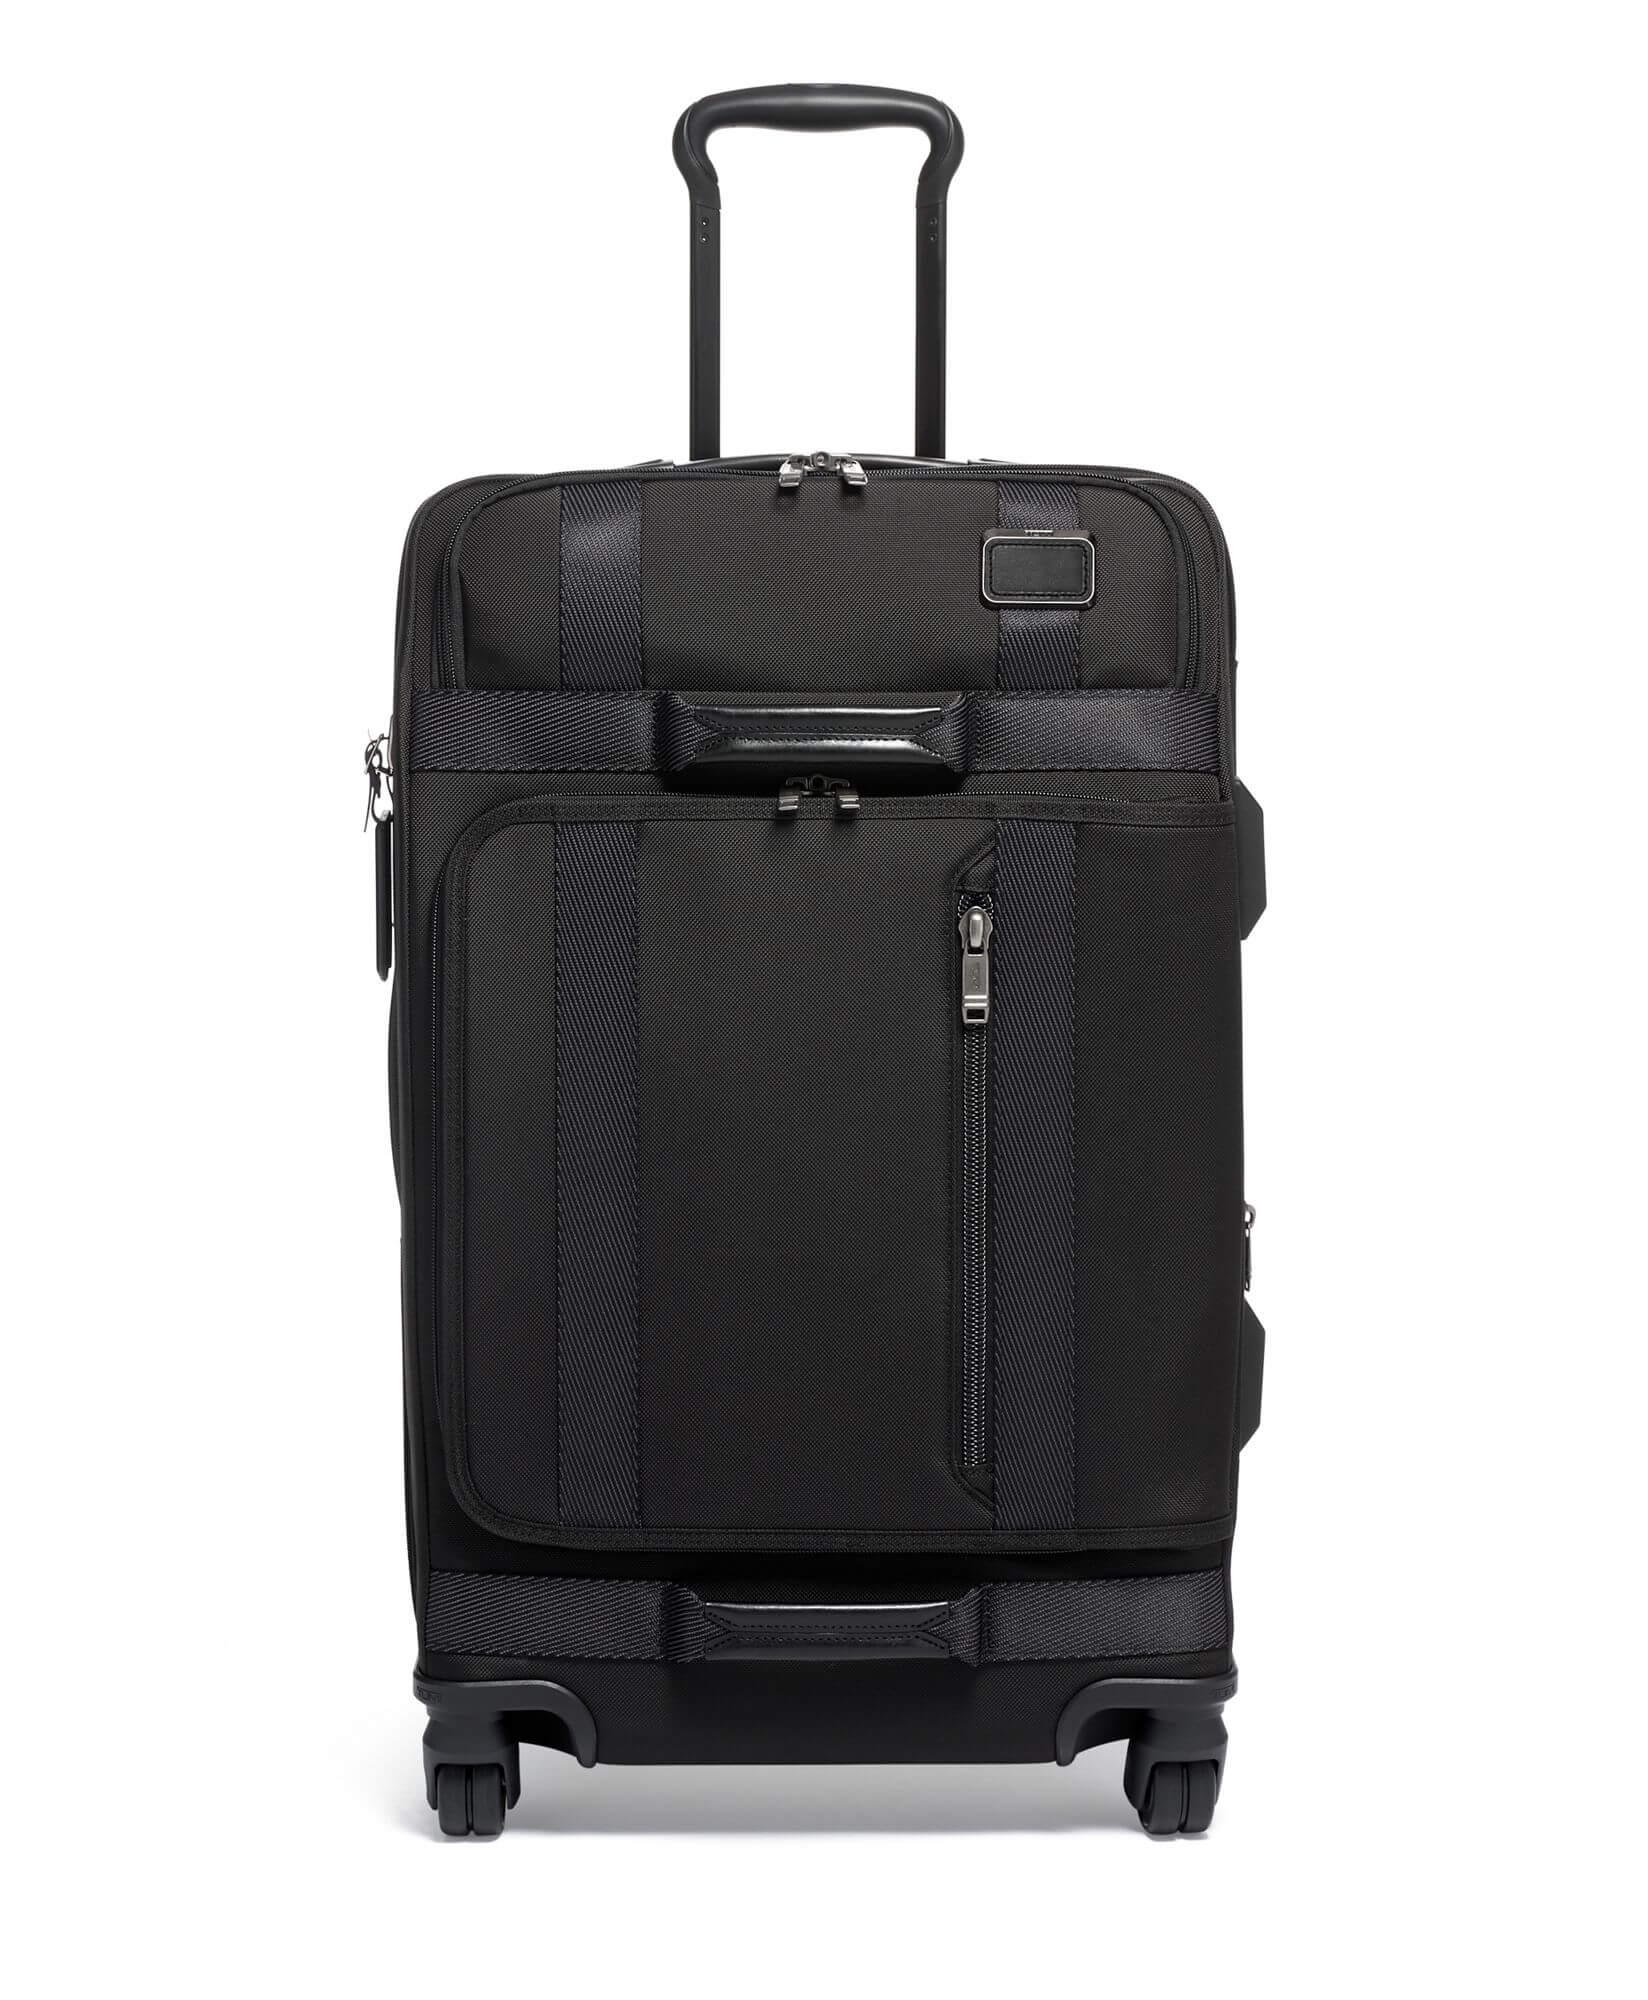 tumi merge short trip expandable suitcase black with front zipper and handle